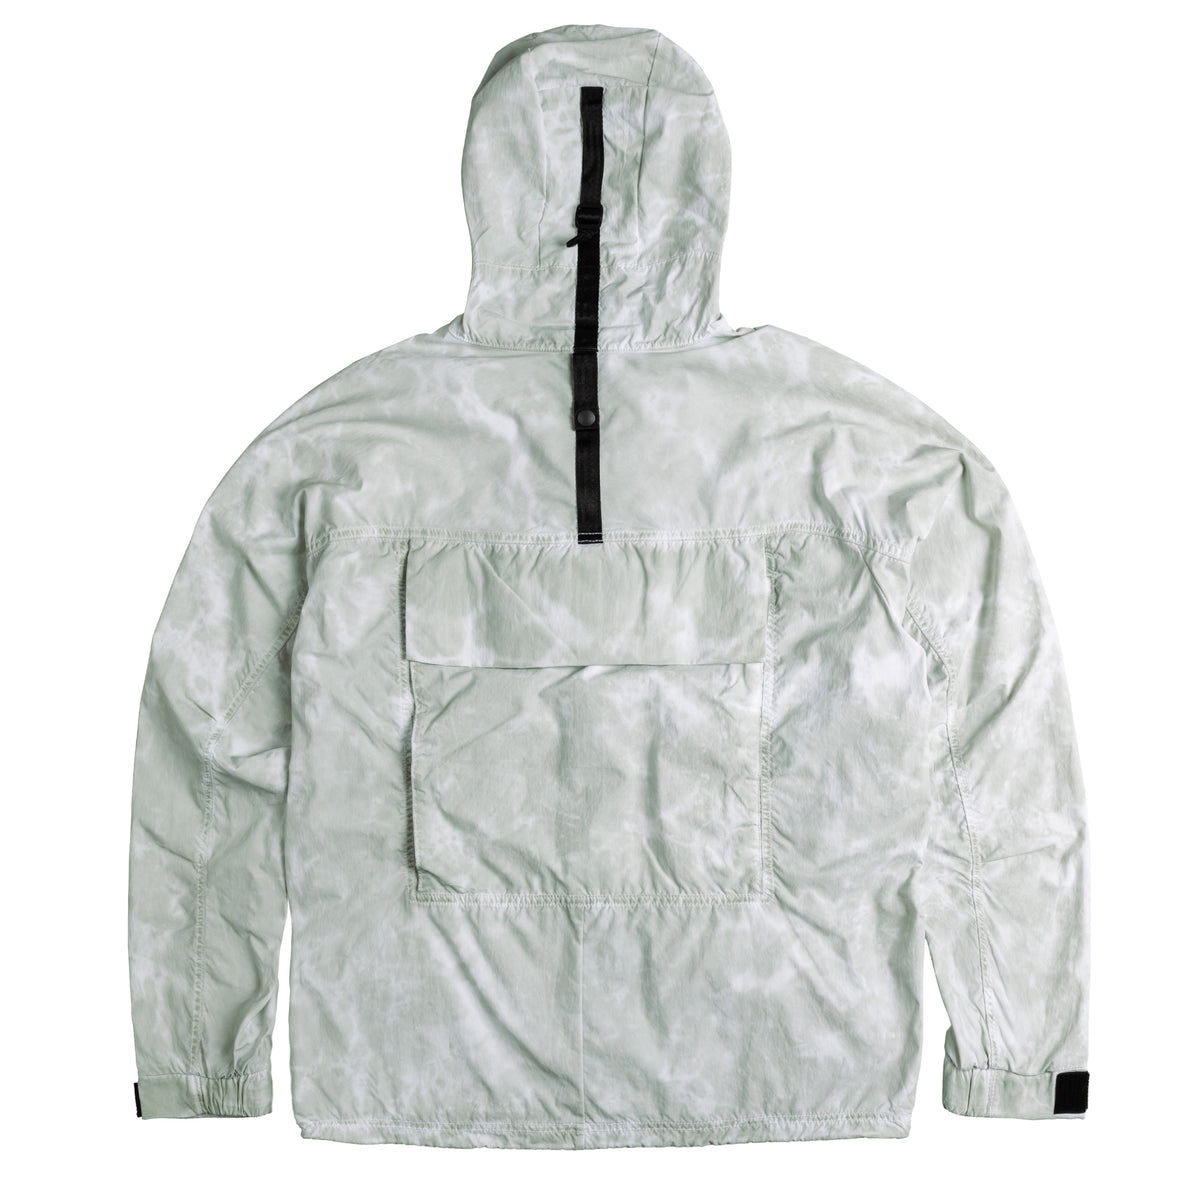 Nike Tech Pack Hooded Woven Jacket – buy now at Asphaltgold Online Store!